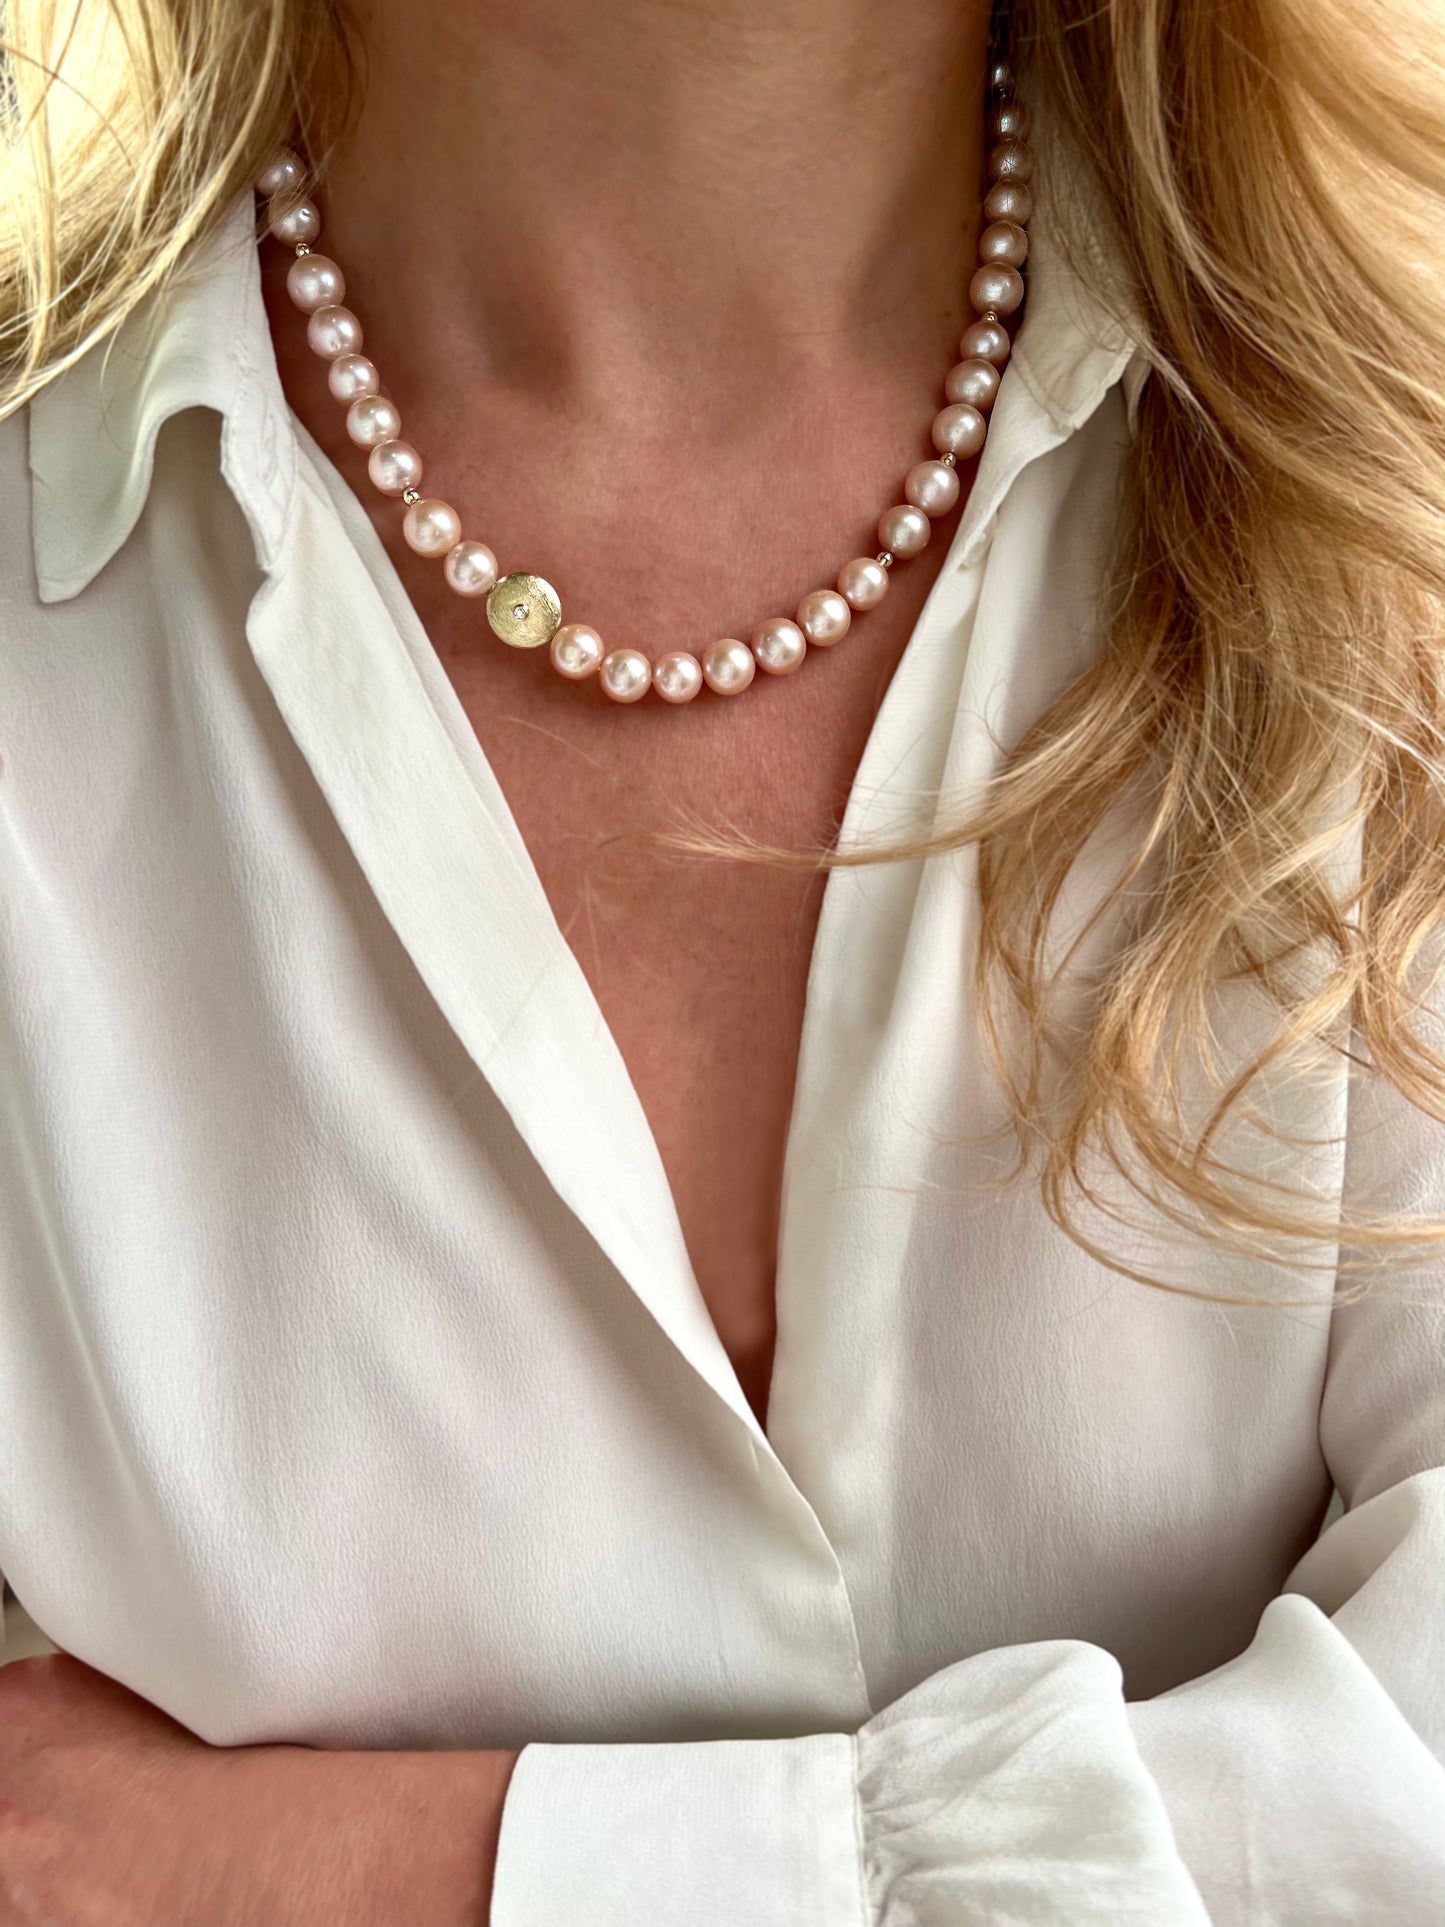 Pearl Necklace - Powder Rose Freshwater Pearls